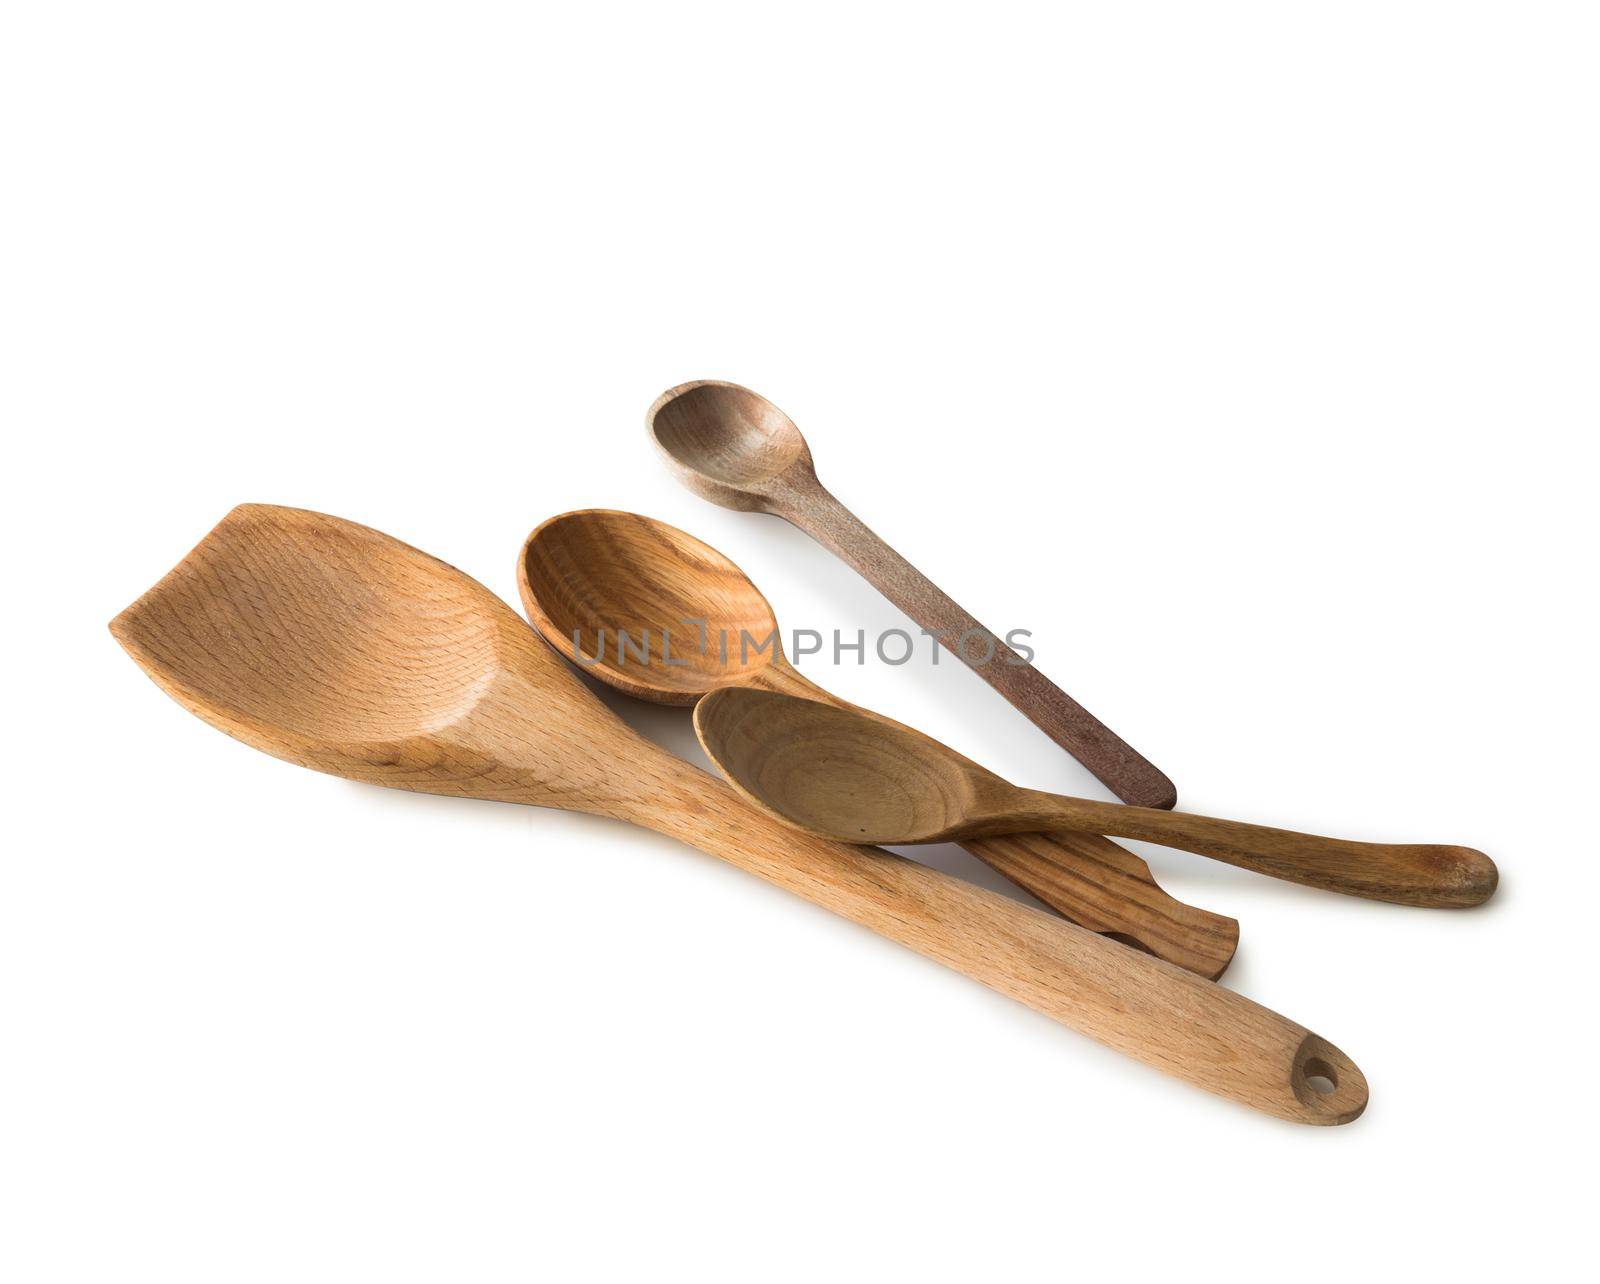 set of wooden kitchen spoons and other items by tan4ikk1